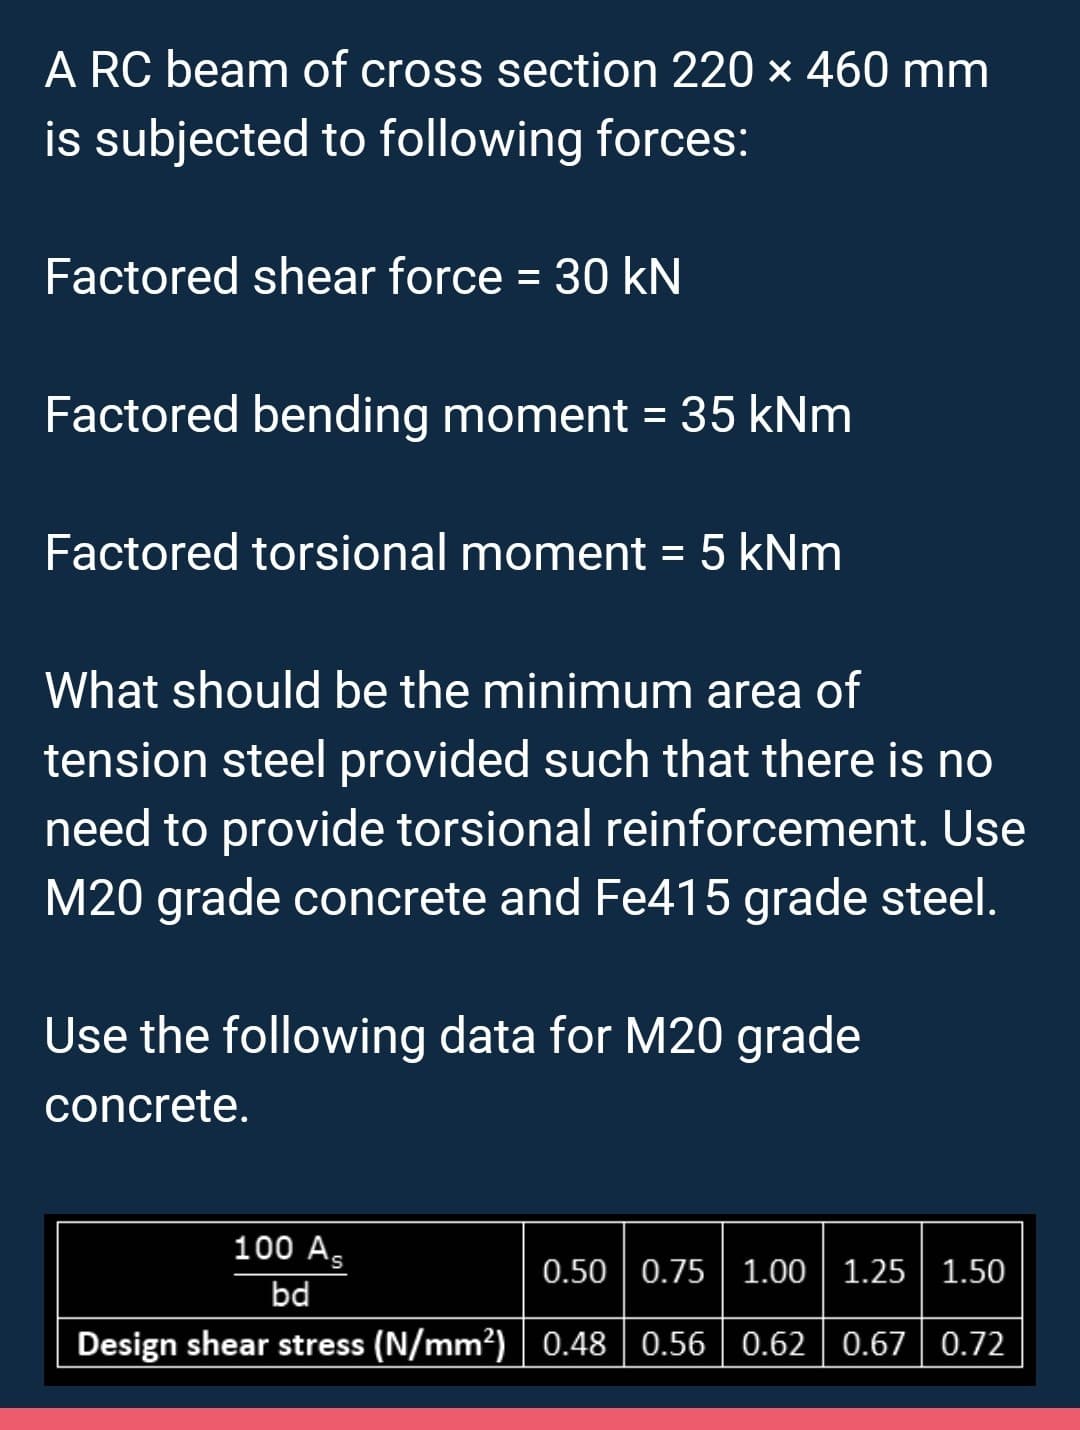 A RC beam of cross section 220 × 460 mm
is subjected to following forces:
Factored shear force = 30 kN
Factored bending moment = 35 kNm
Factored torsional moment = 5 kNm
What should be the minimum area of
tension steel provided such that there is no
need to provide torsional reinforcement. Use
M20 grade concrete and Fe415 grade steel.
Use the following data for M20 grade
concrete.
100 As
0.50 0.75 1.00 1.25 1.50
bd
Design shear stress (N/mm²) 0.48 0.56 0.62 0.67 0.72